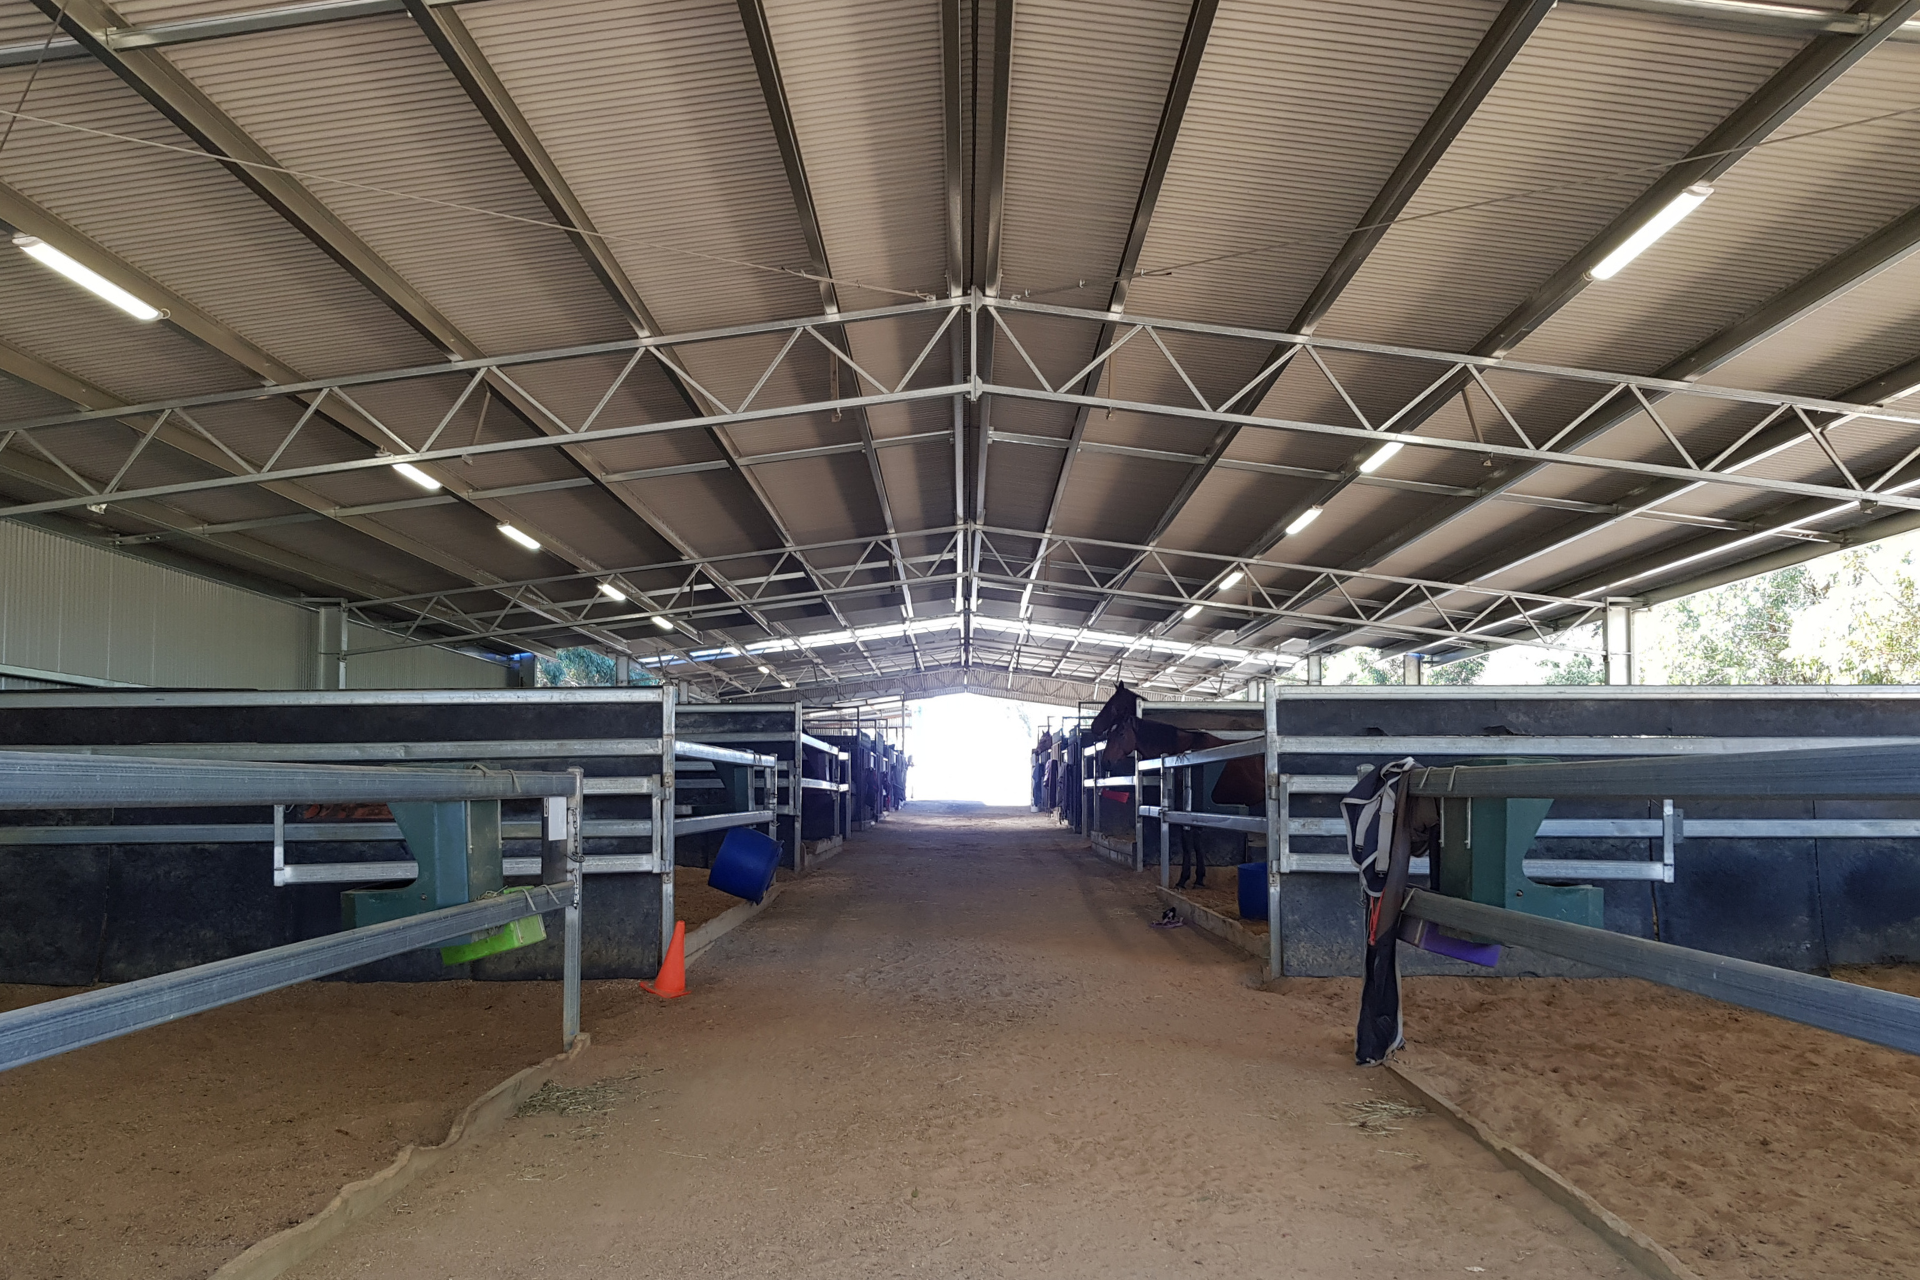 You are currently viewing 45m x 15m x 3.6m horse yard cover